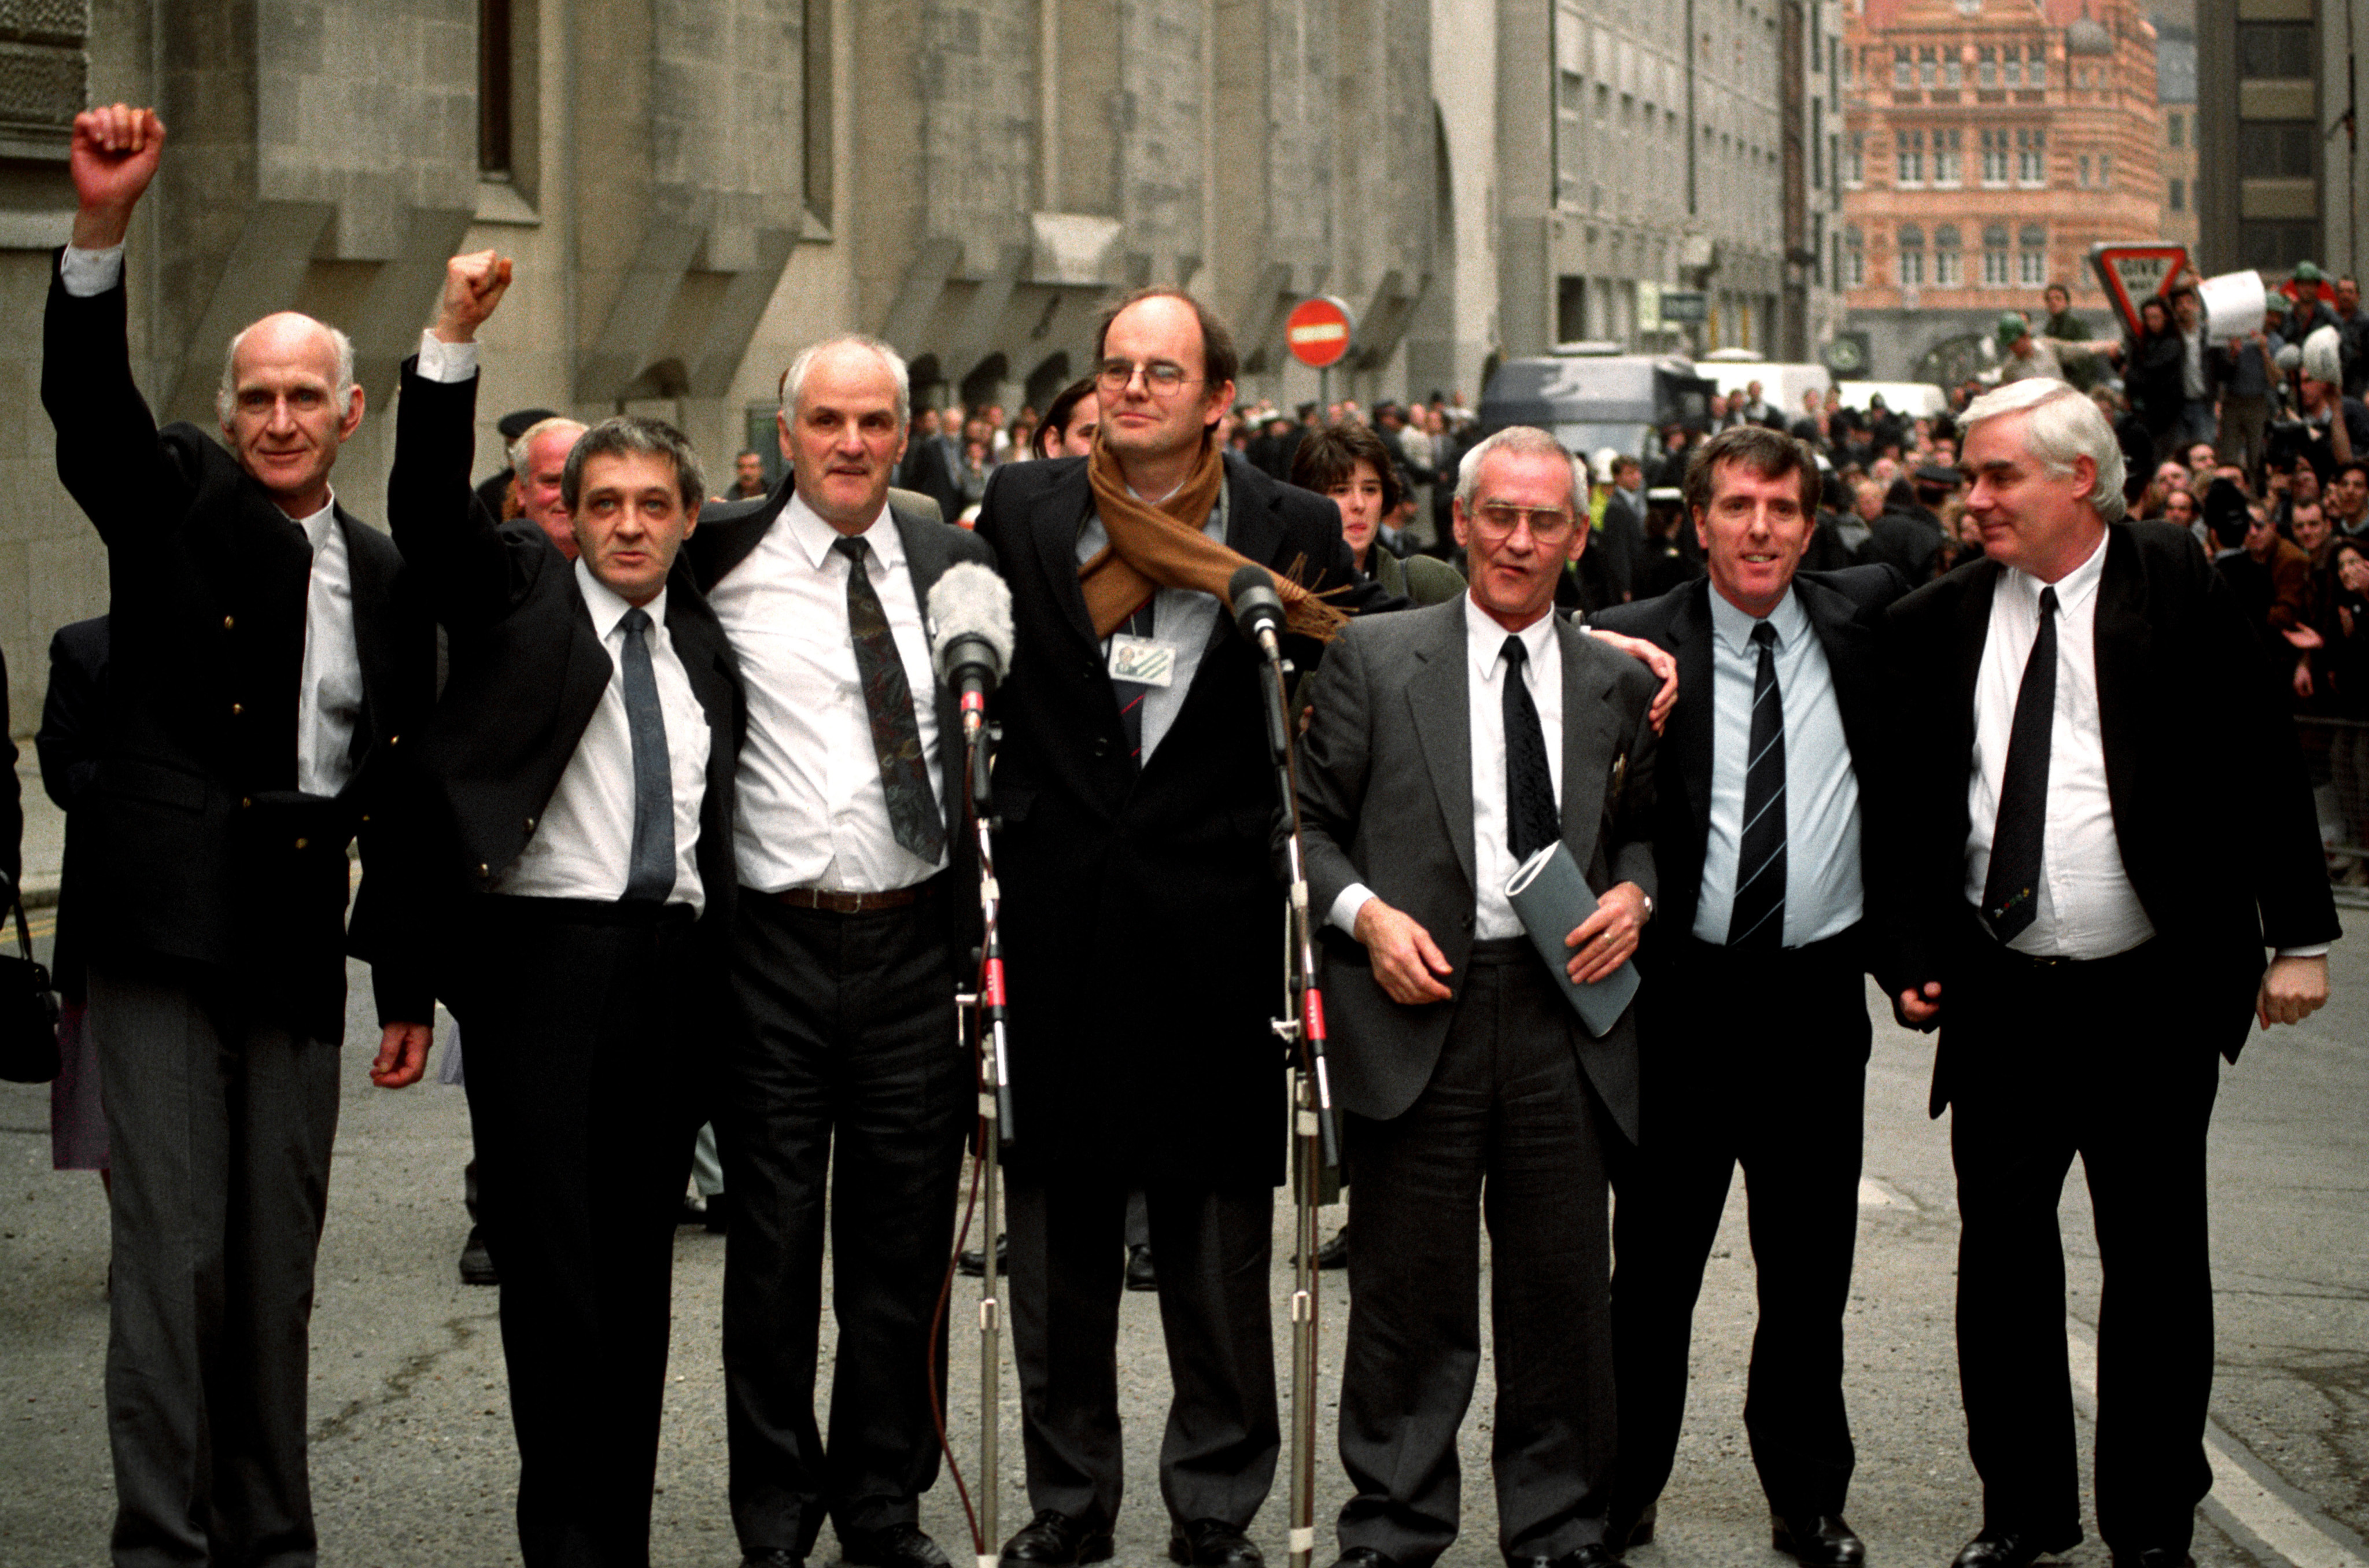 The Birmingham Six and then-MP Chris Mullen, centre, outside the Old Bailey